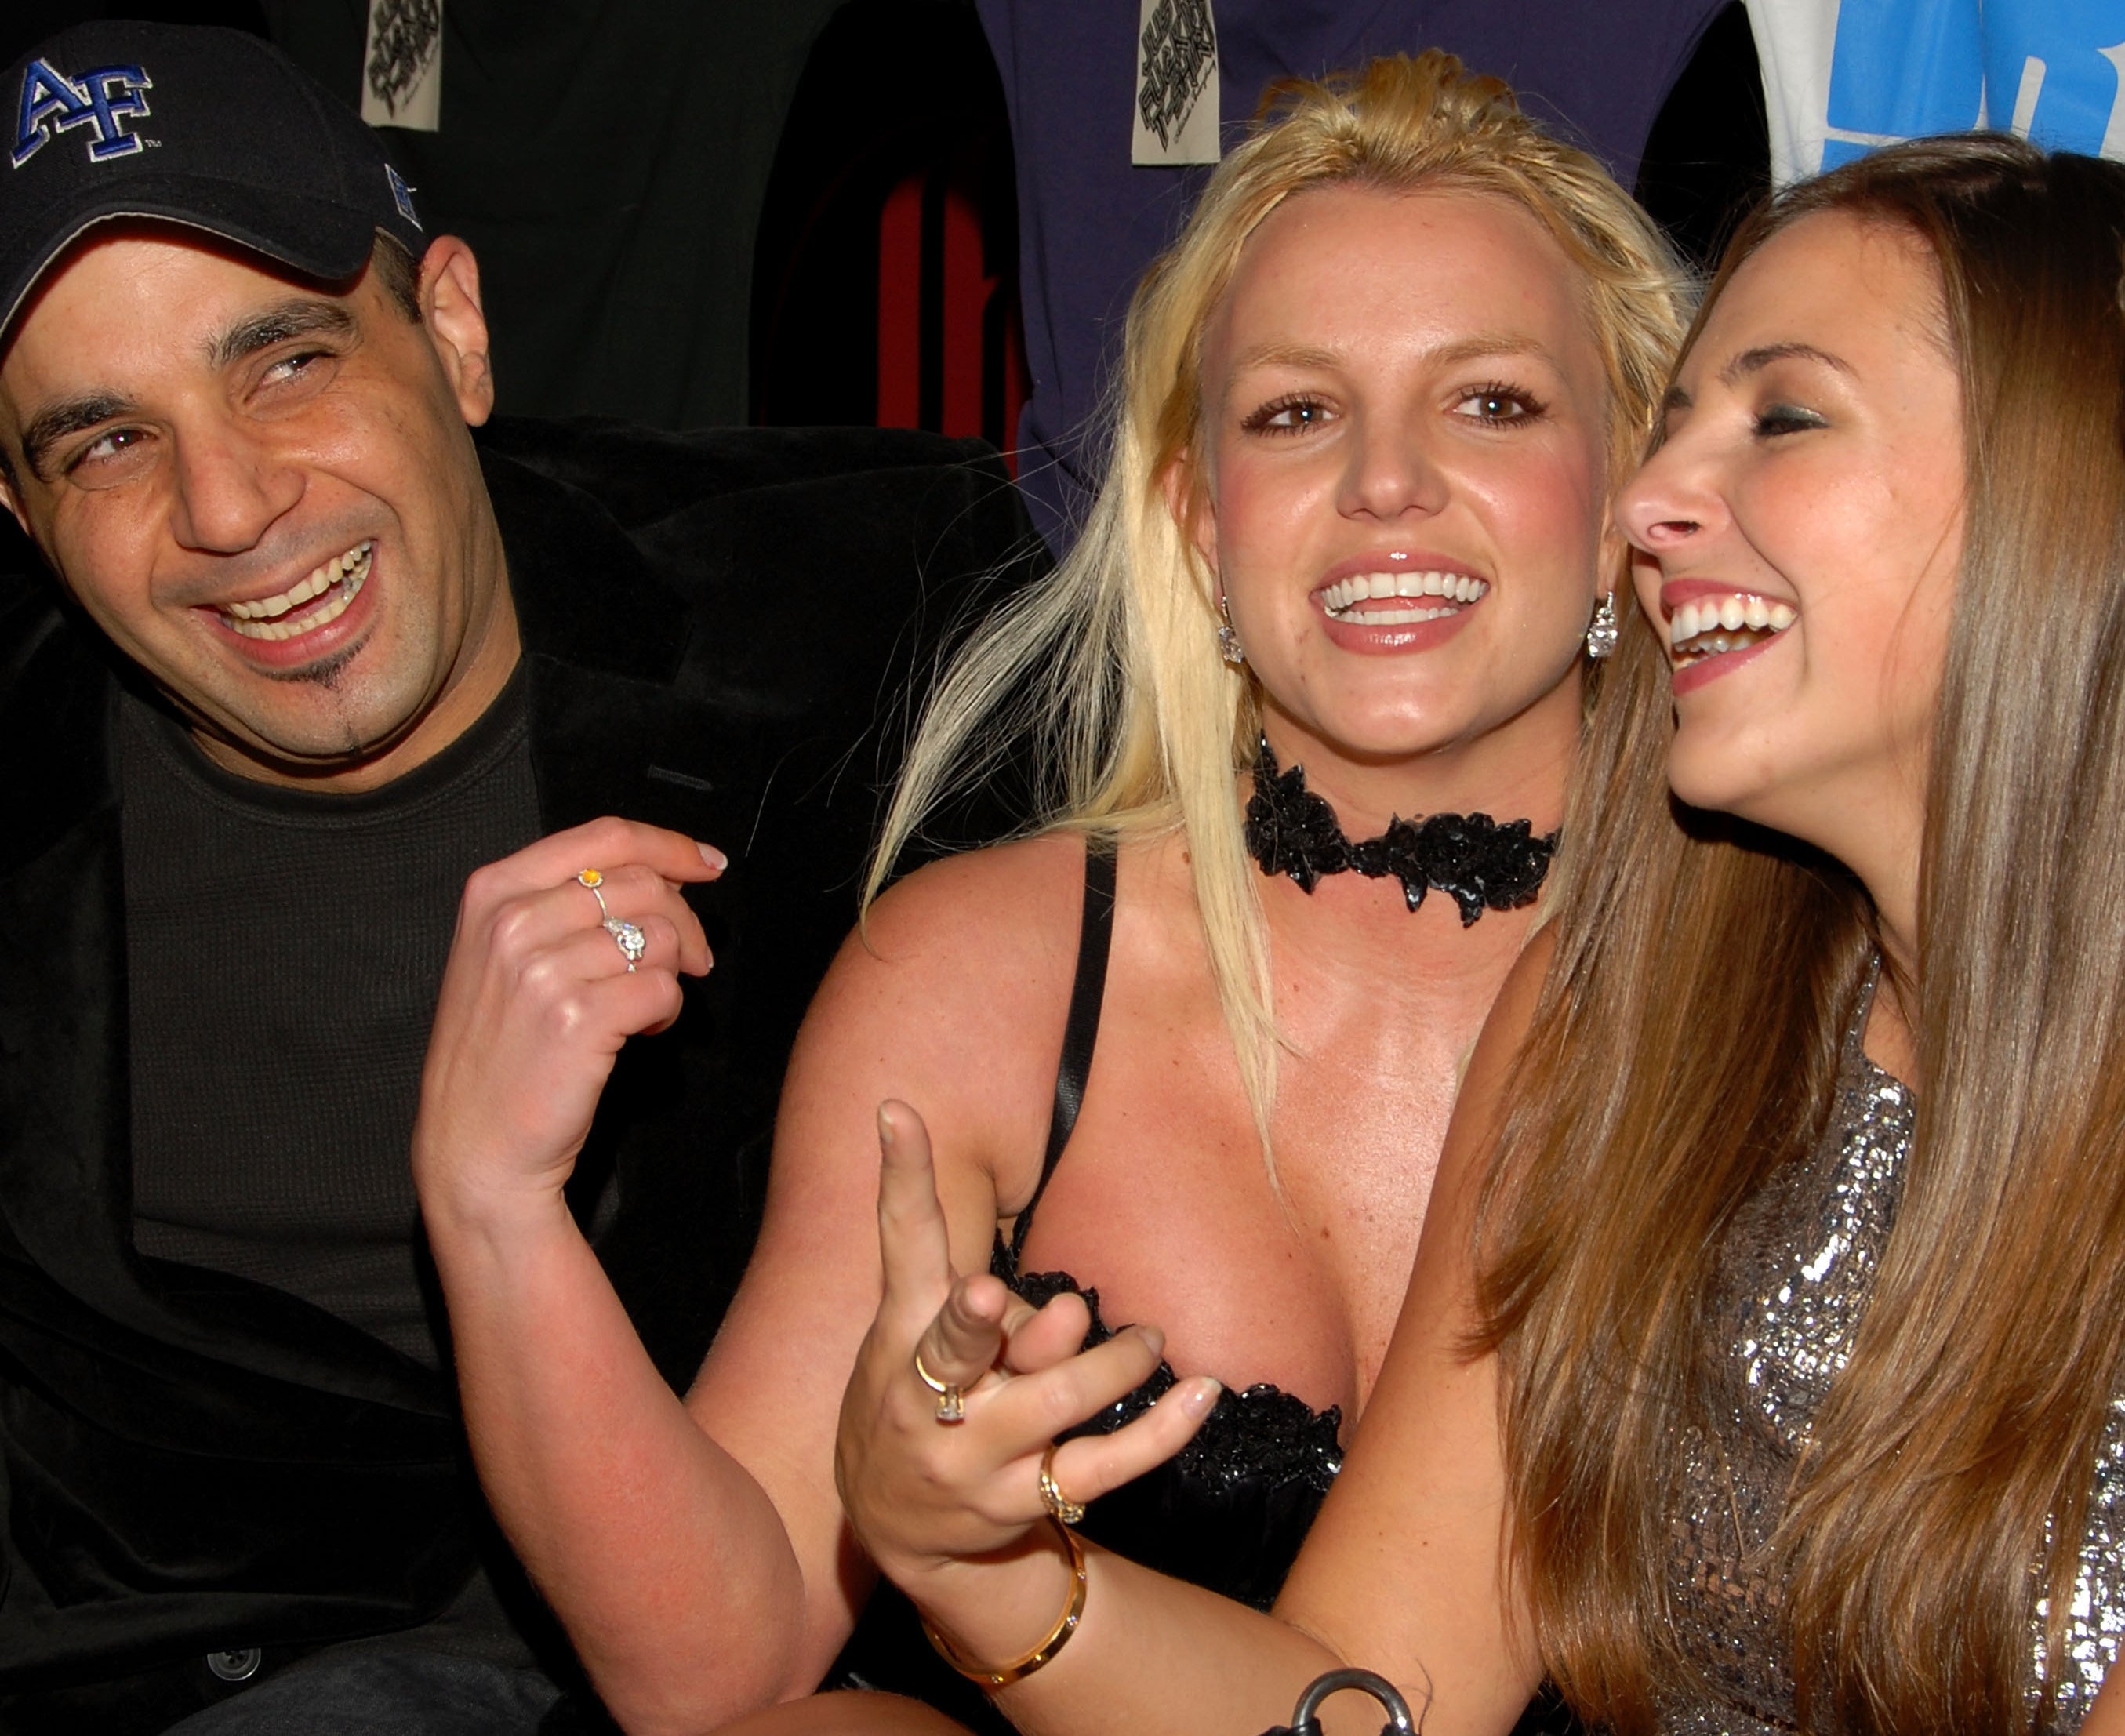 Britney is surrounded by friends many years ago